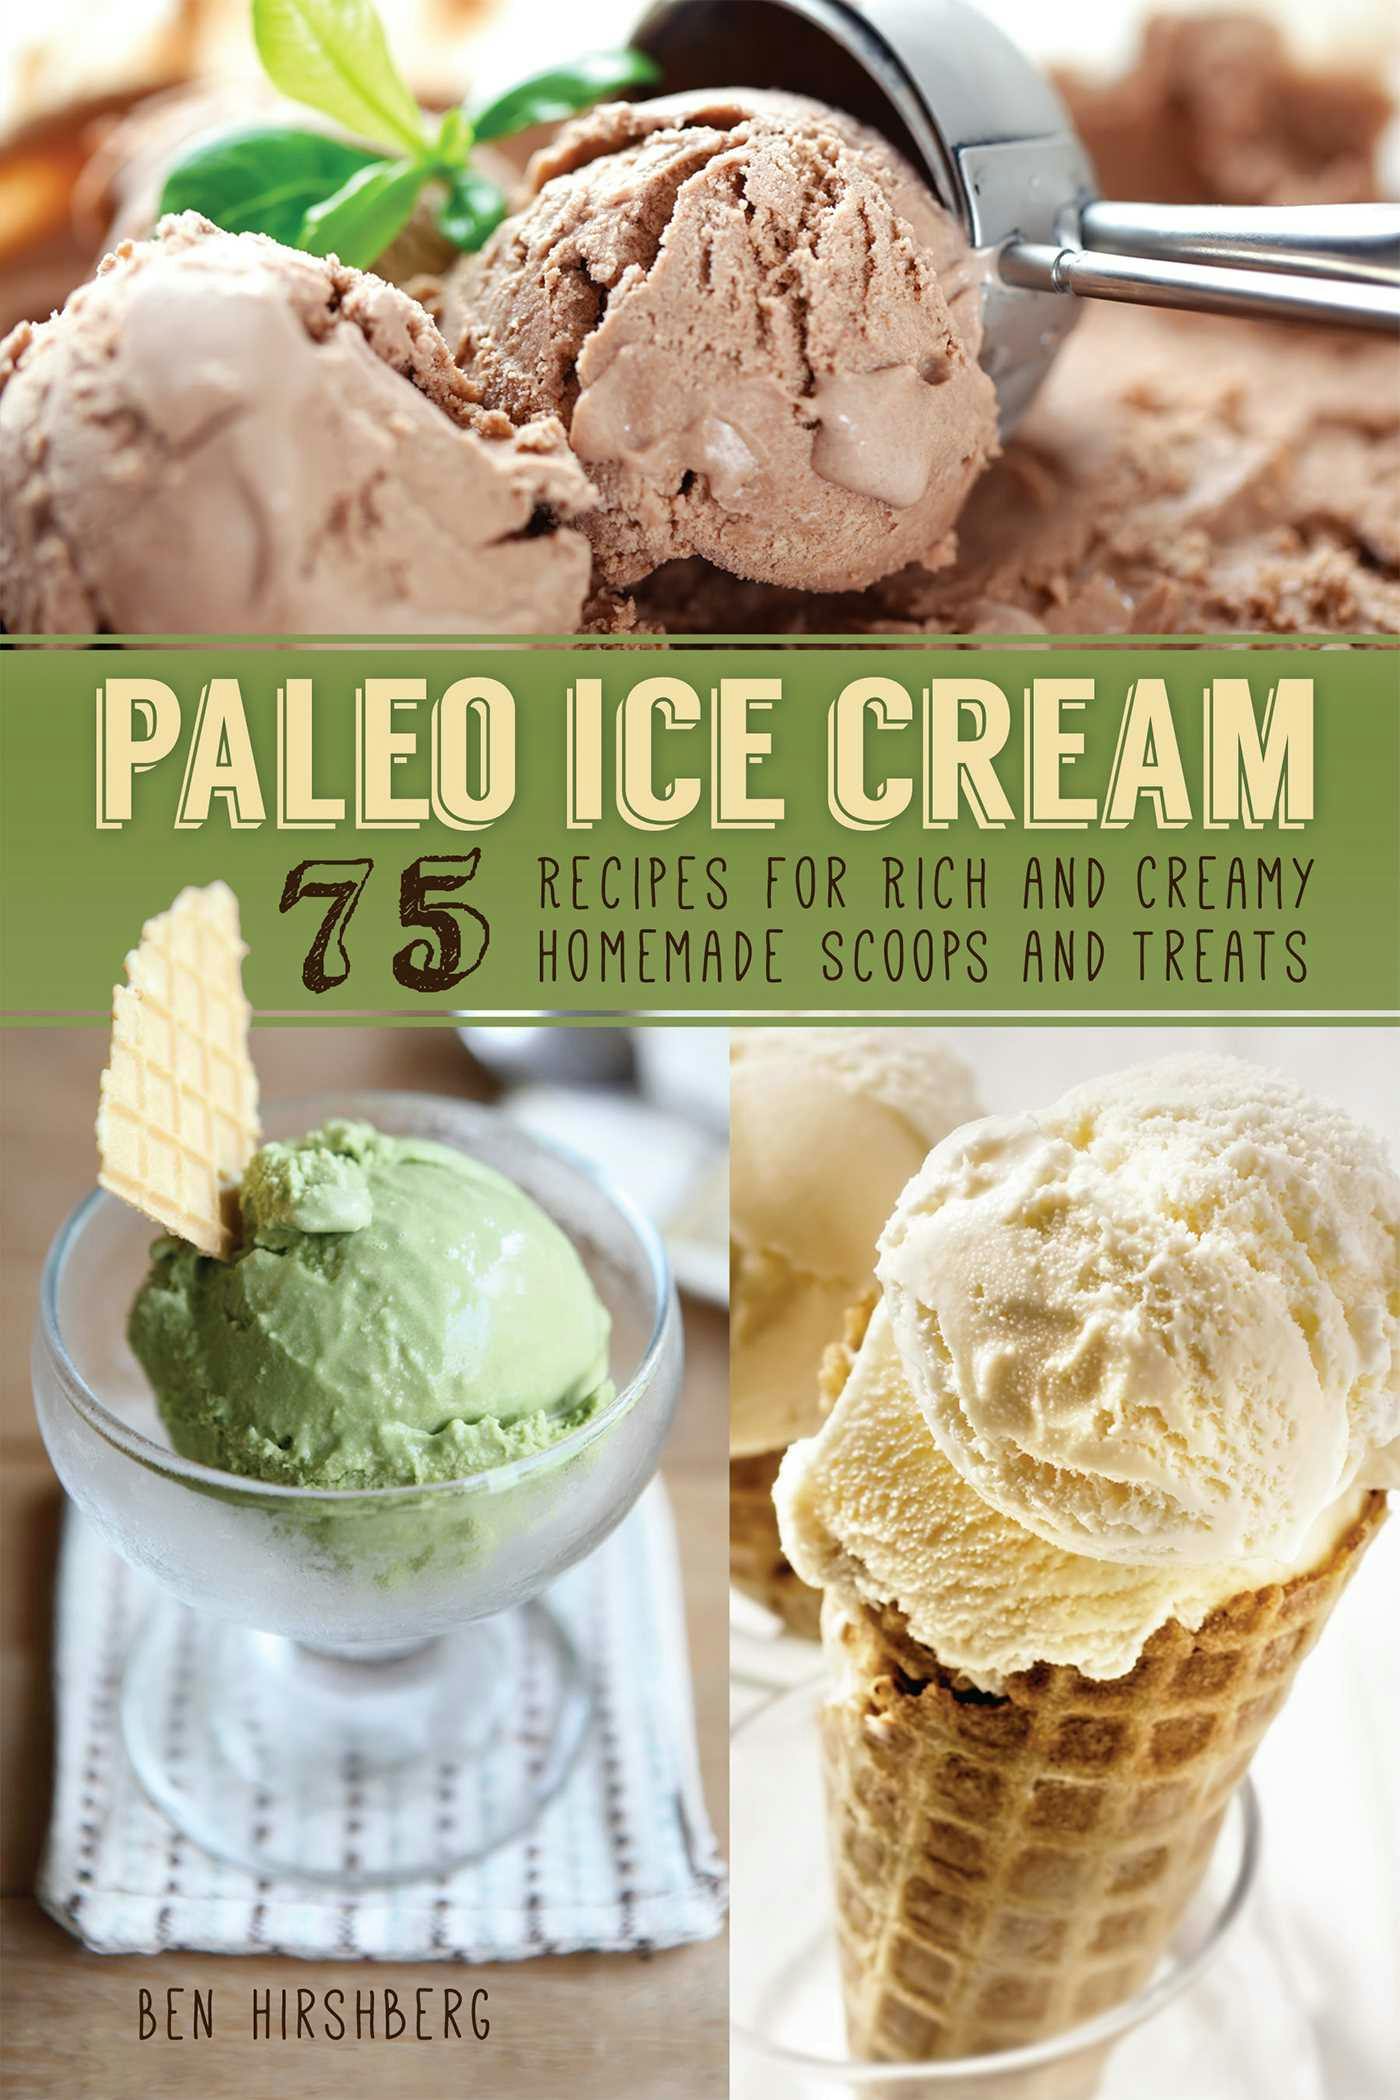 Paleo Ice Cream: 75 Recipes for Rich and Creamy Homemade Scoops and Treats - Ben Hirshberg